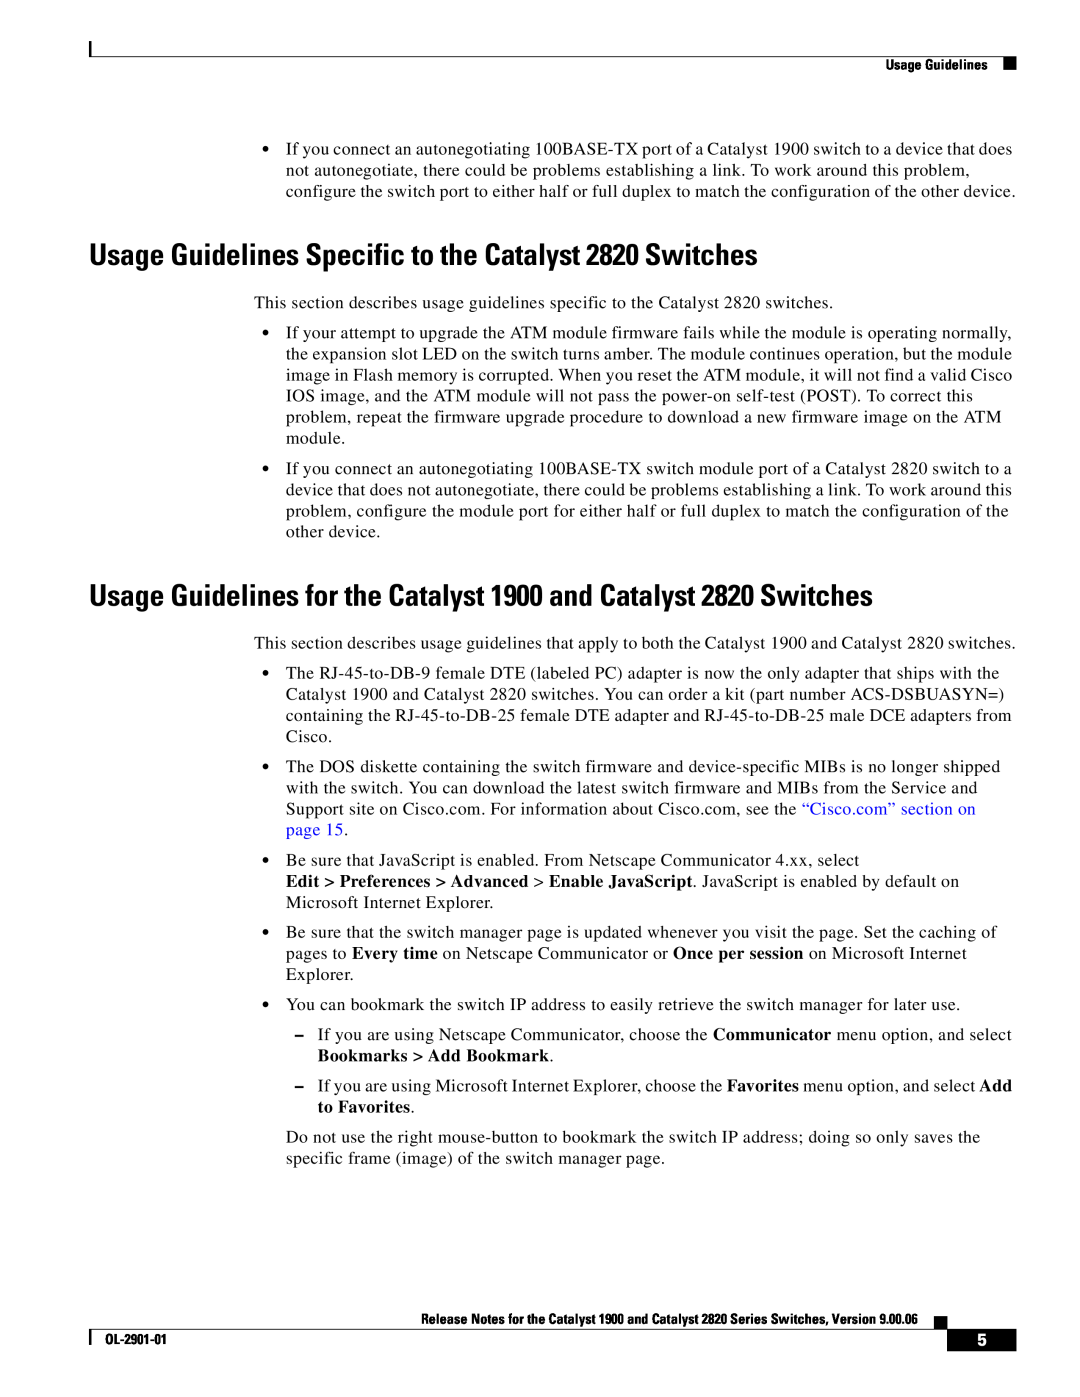 Cisco Systems 1900 manual Usage Guidelines Specific to the Catalyst 2820 Switches 